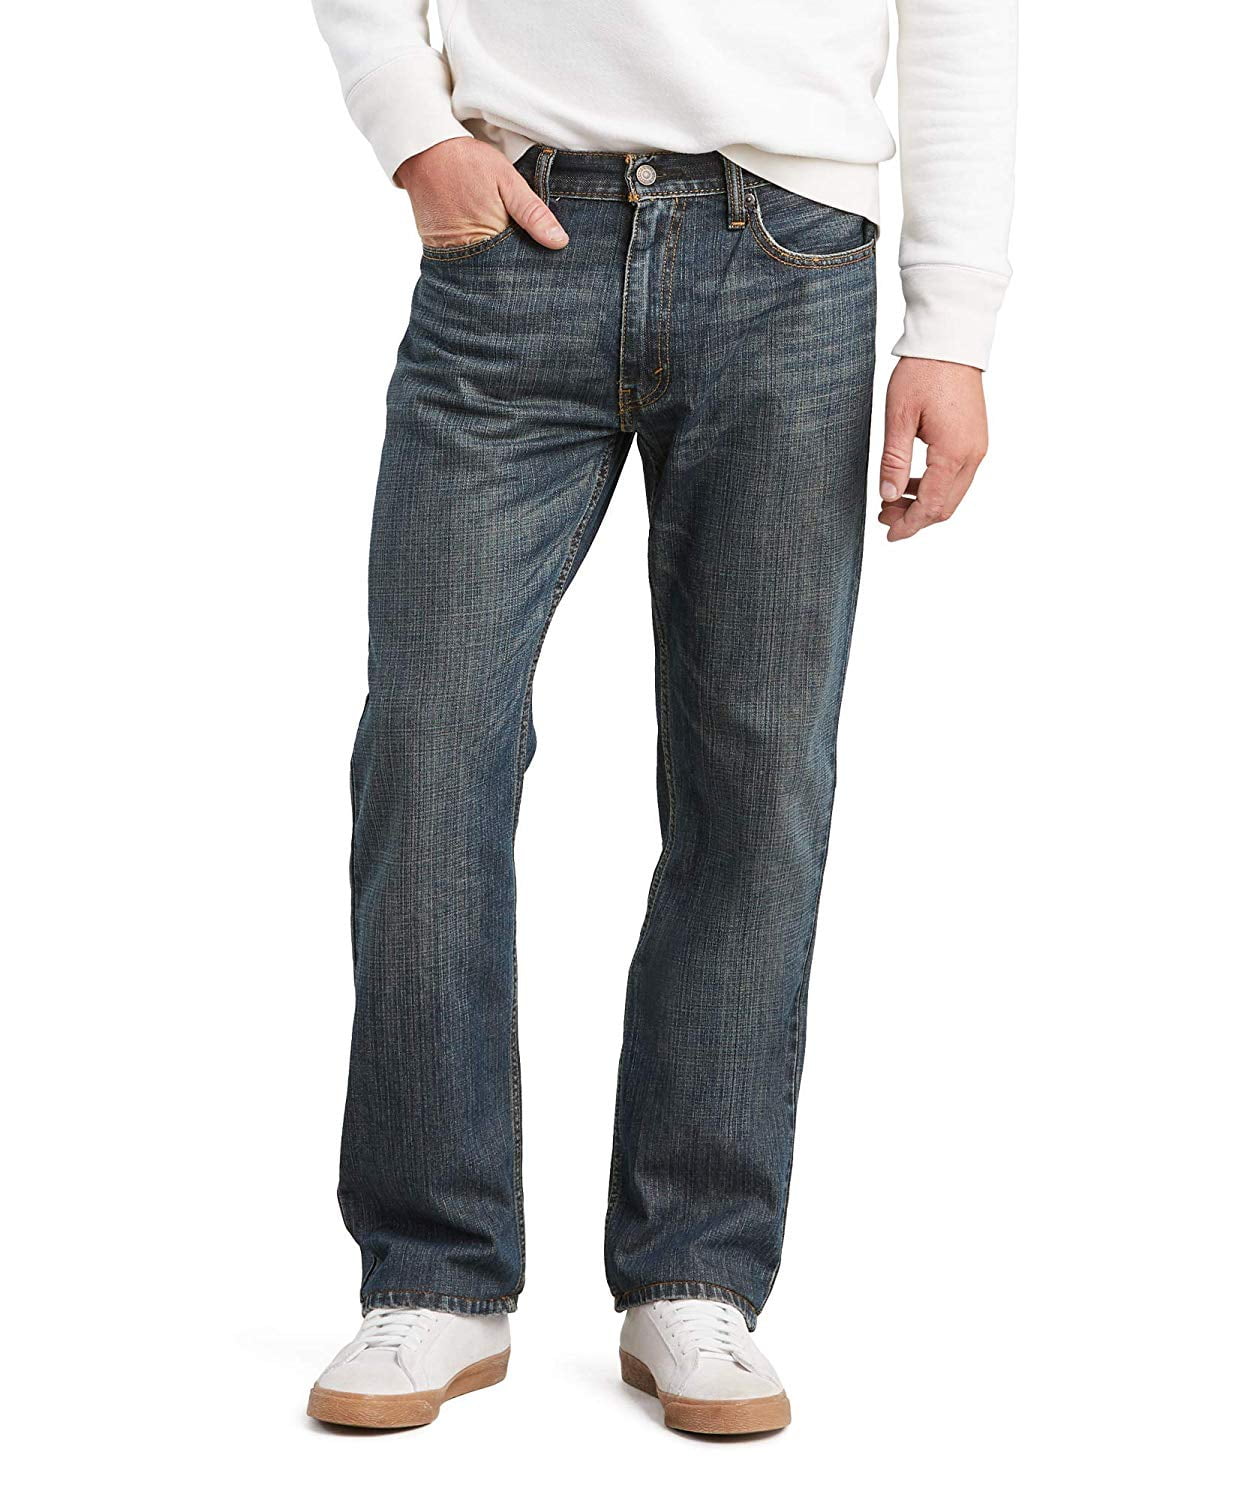 Levi's Men's 559 Relaxed Straight Fit Jean, Range, 36x34 | Walmart Canada